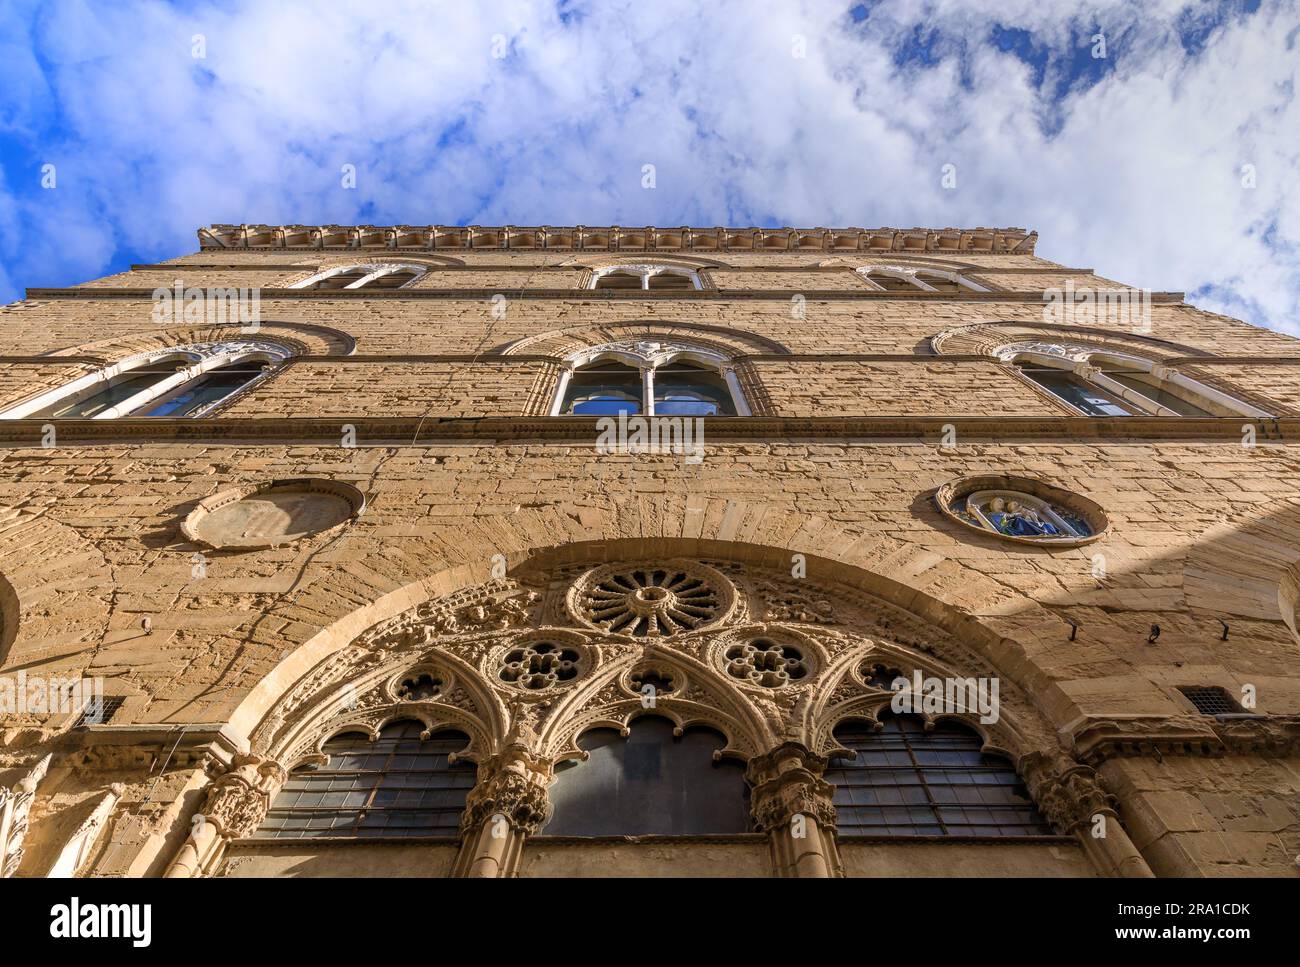 The church of Orsanmichele in Florence, Italy. Stock Photo